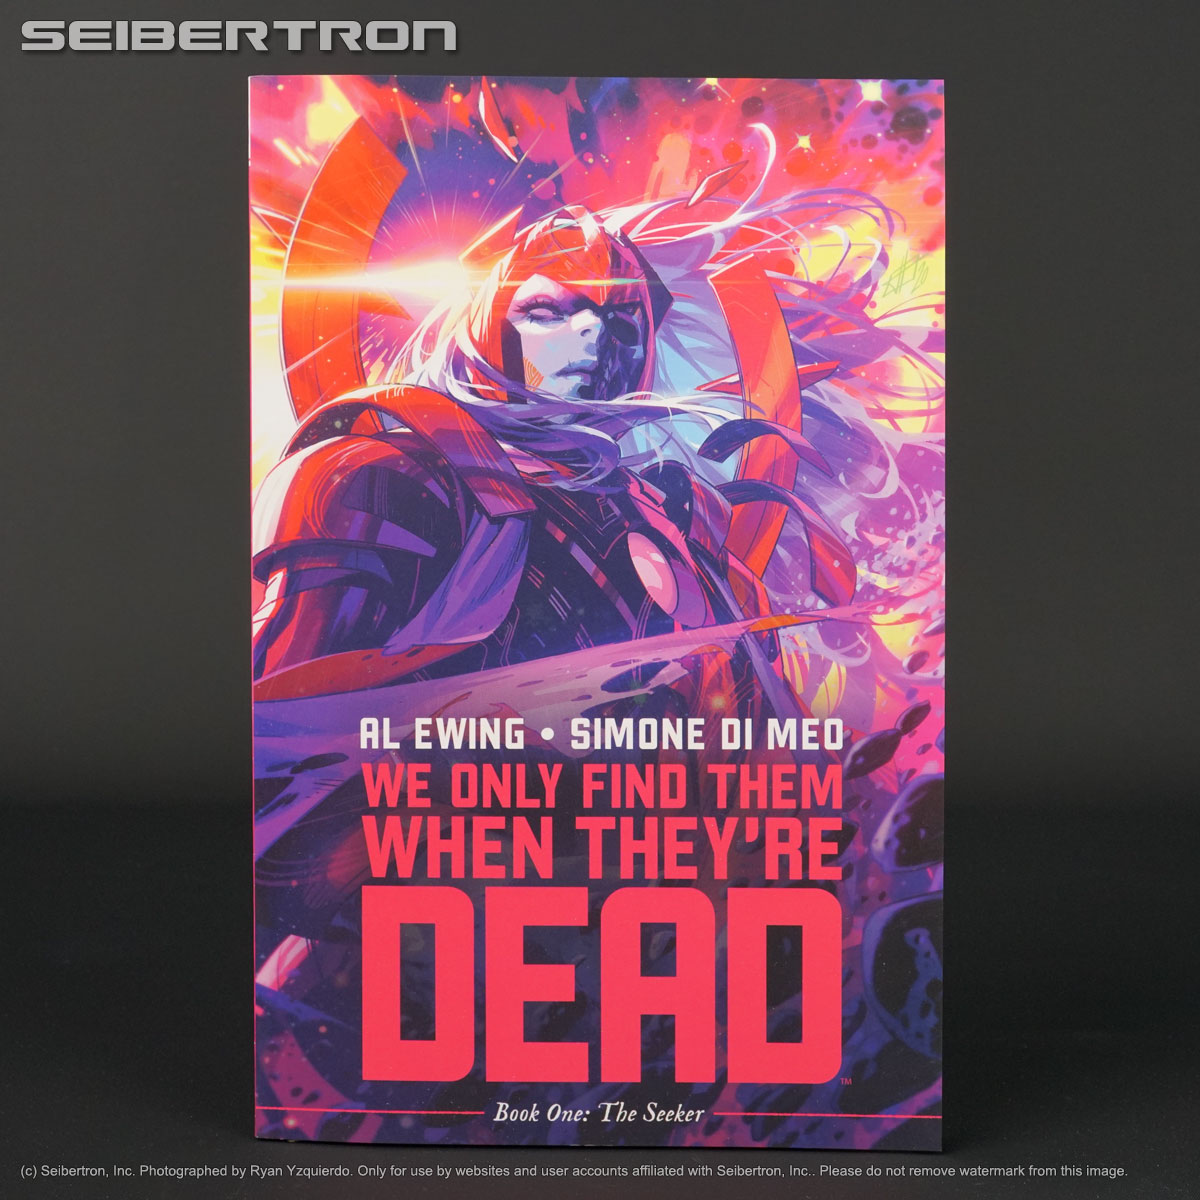 WE ONLY FIND THEM WHEN THEY'RE DEAD Book One: The Seeker TPB Boom Comics 2021 DEC201076 (W) Ewing (A) Di Meo (CA) Infante